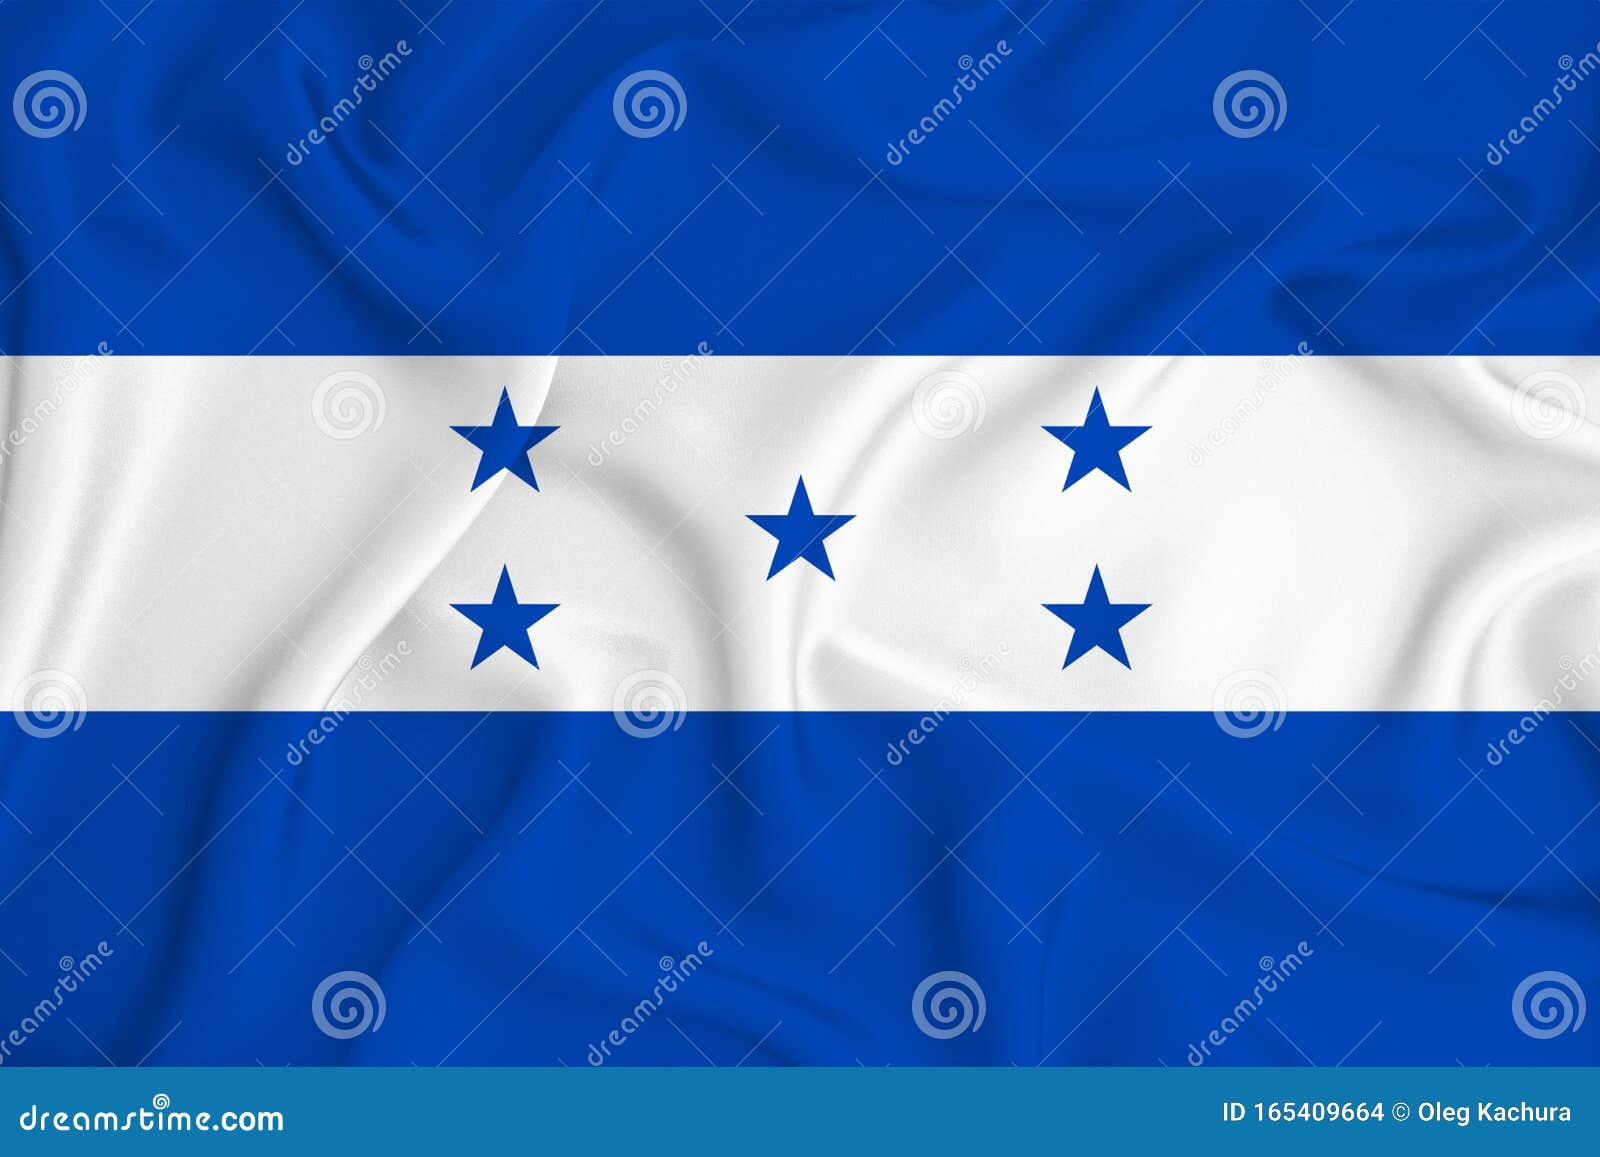 honduras flag on the background texture. concept for er solutions